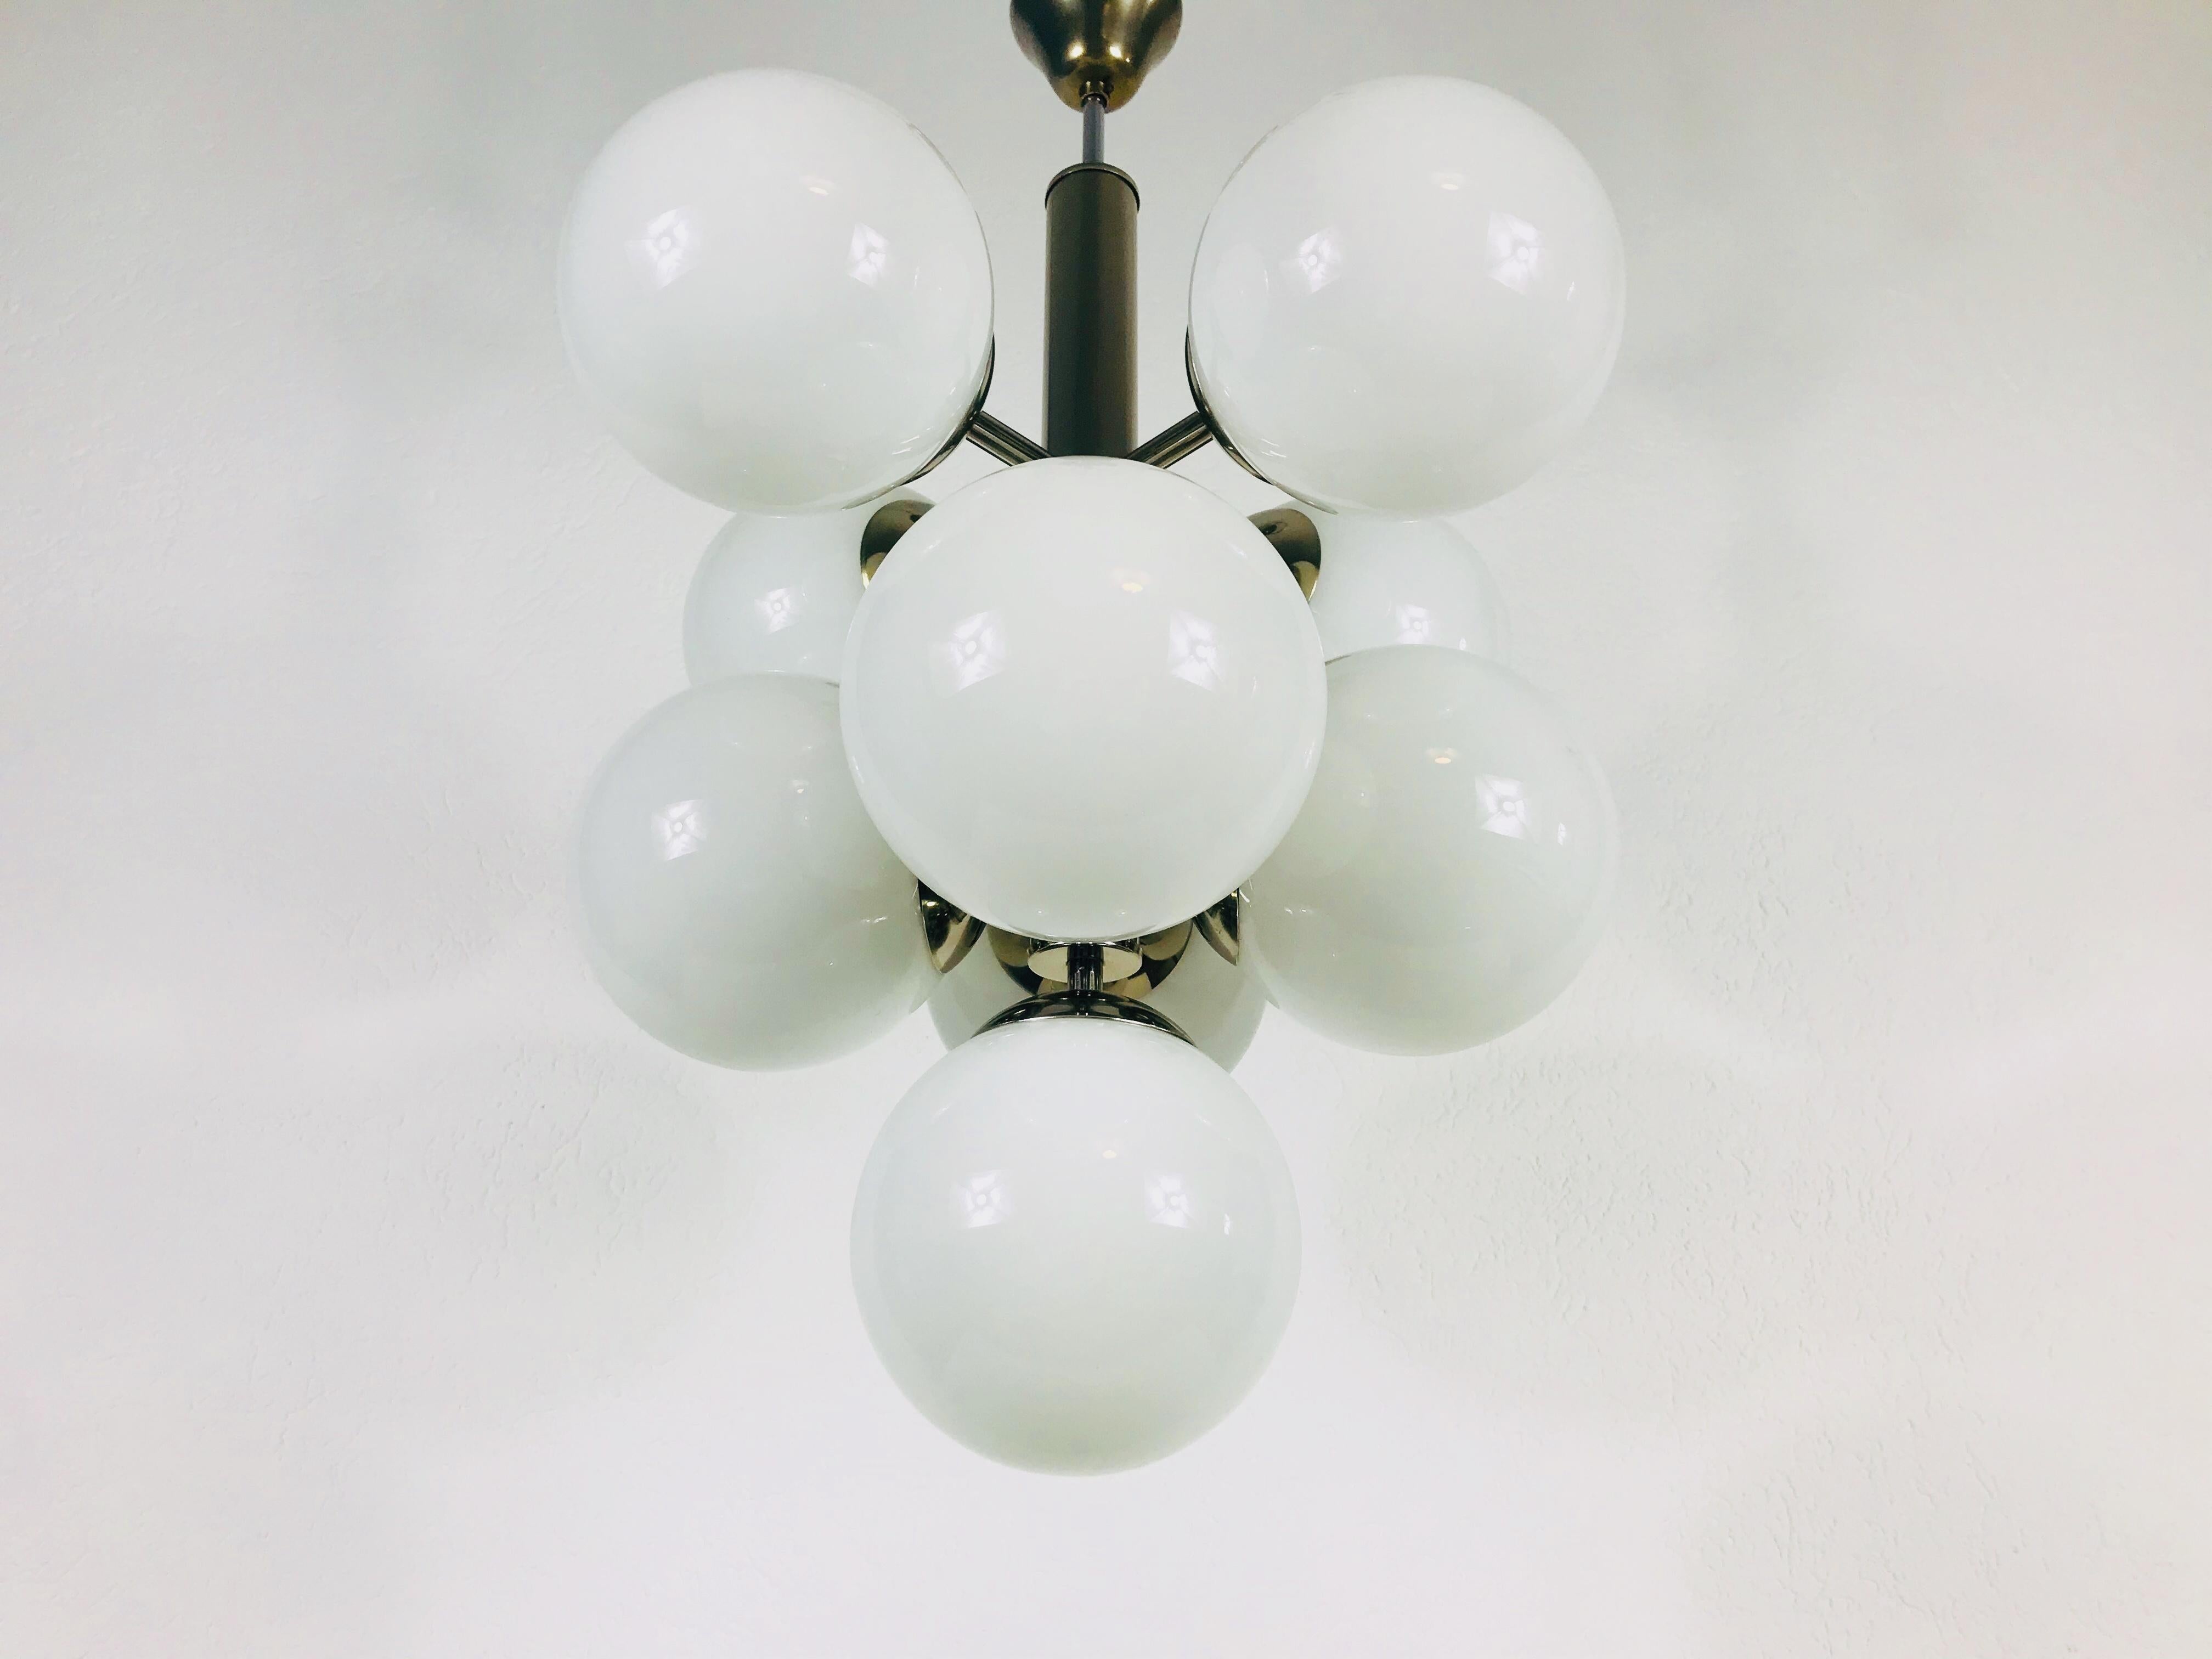 A midcentury chandelier made in Germany in the 1960s. It is fascinating with its Space Age design and nine opal glass balls. The body of the light is made of chrome metal, including the arms. 

The light requires nine E14 light bulbs.